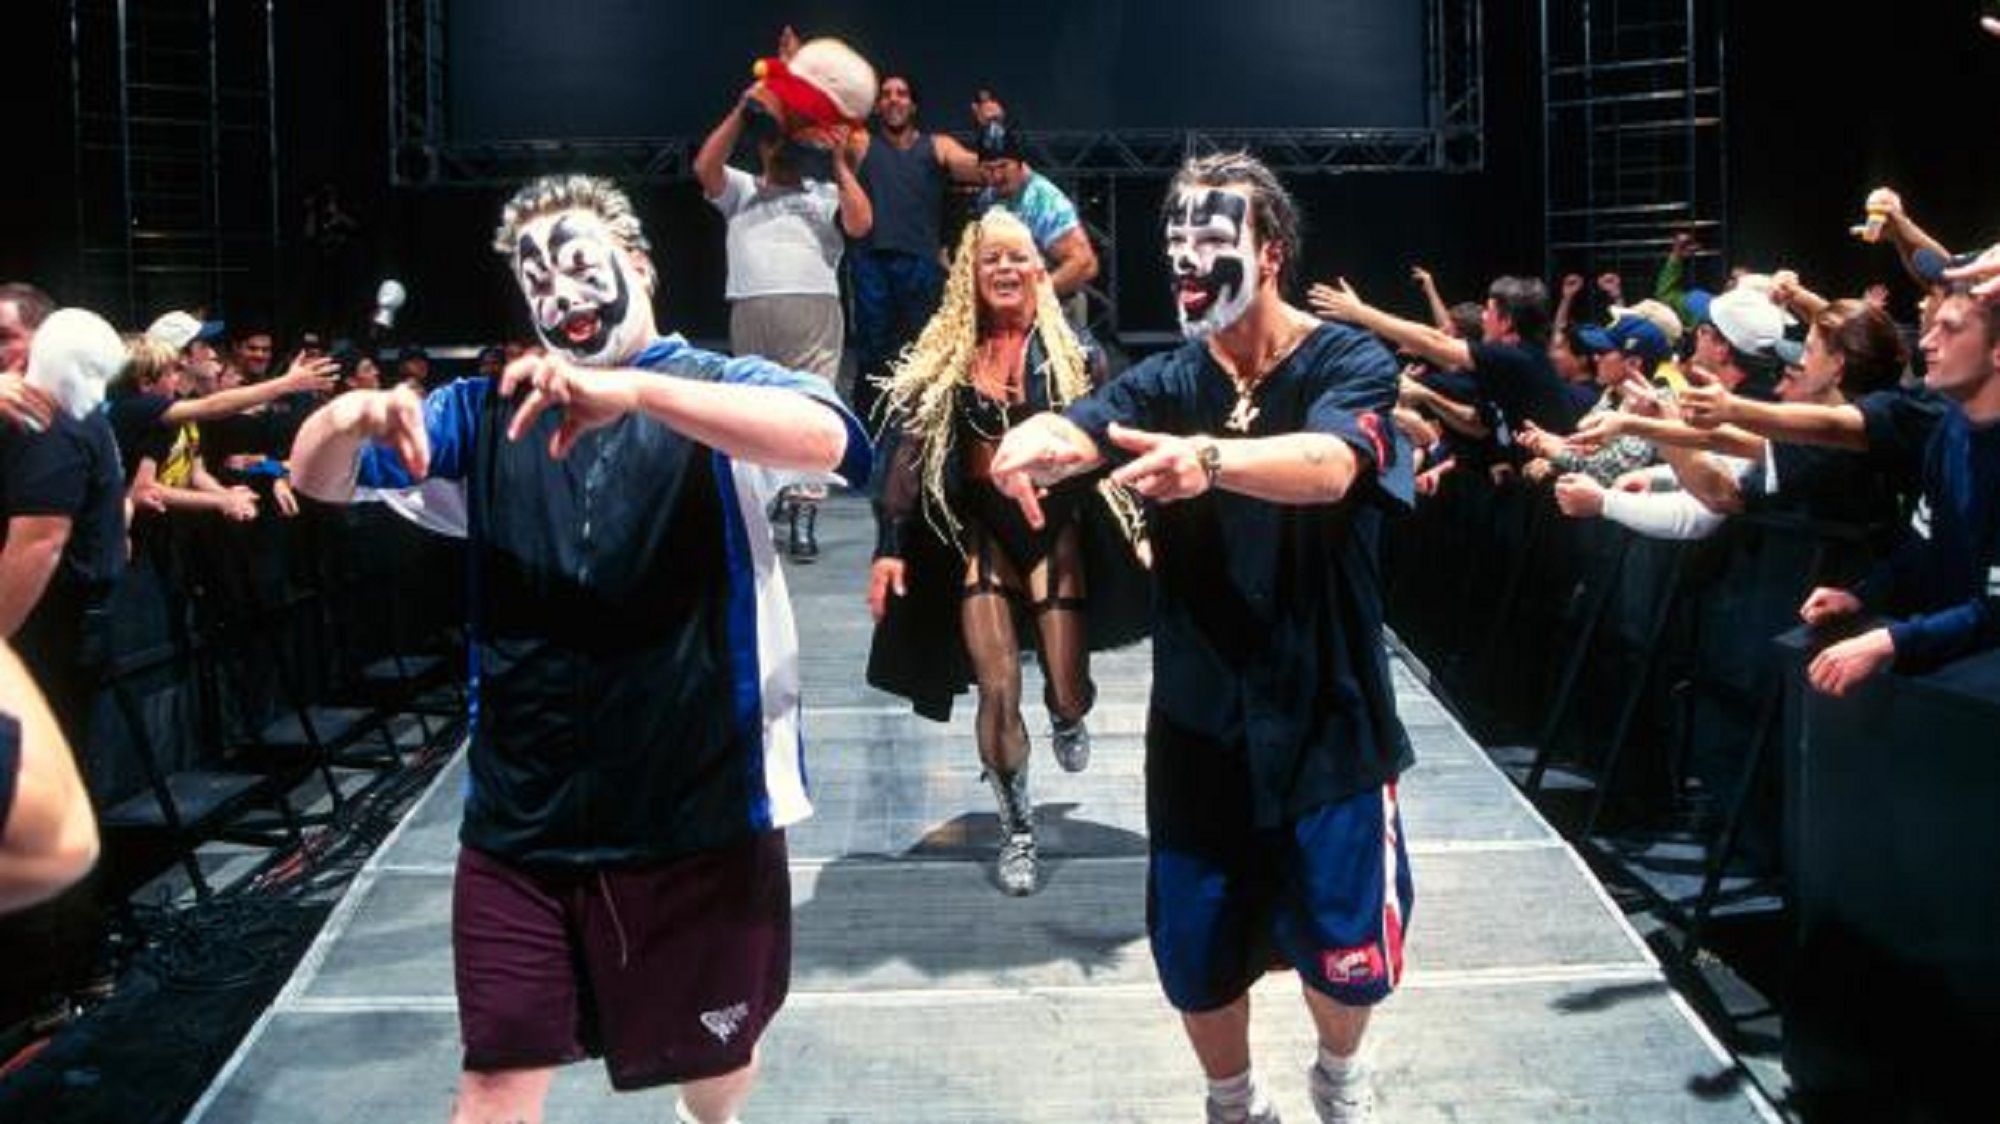 Insane Clown Posse with The Oddities